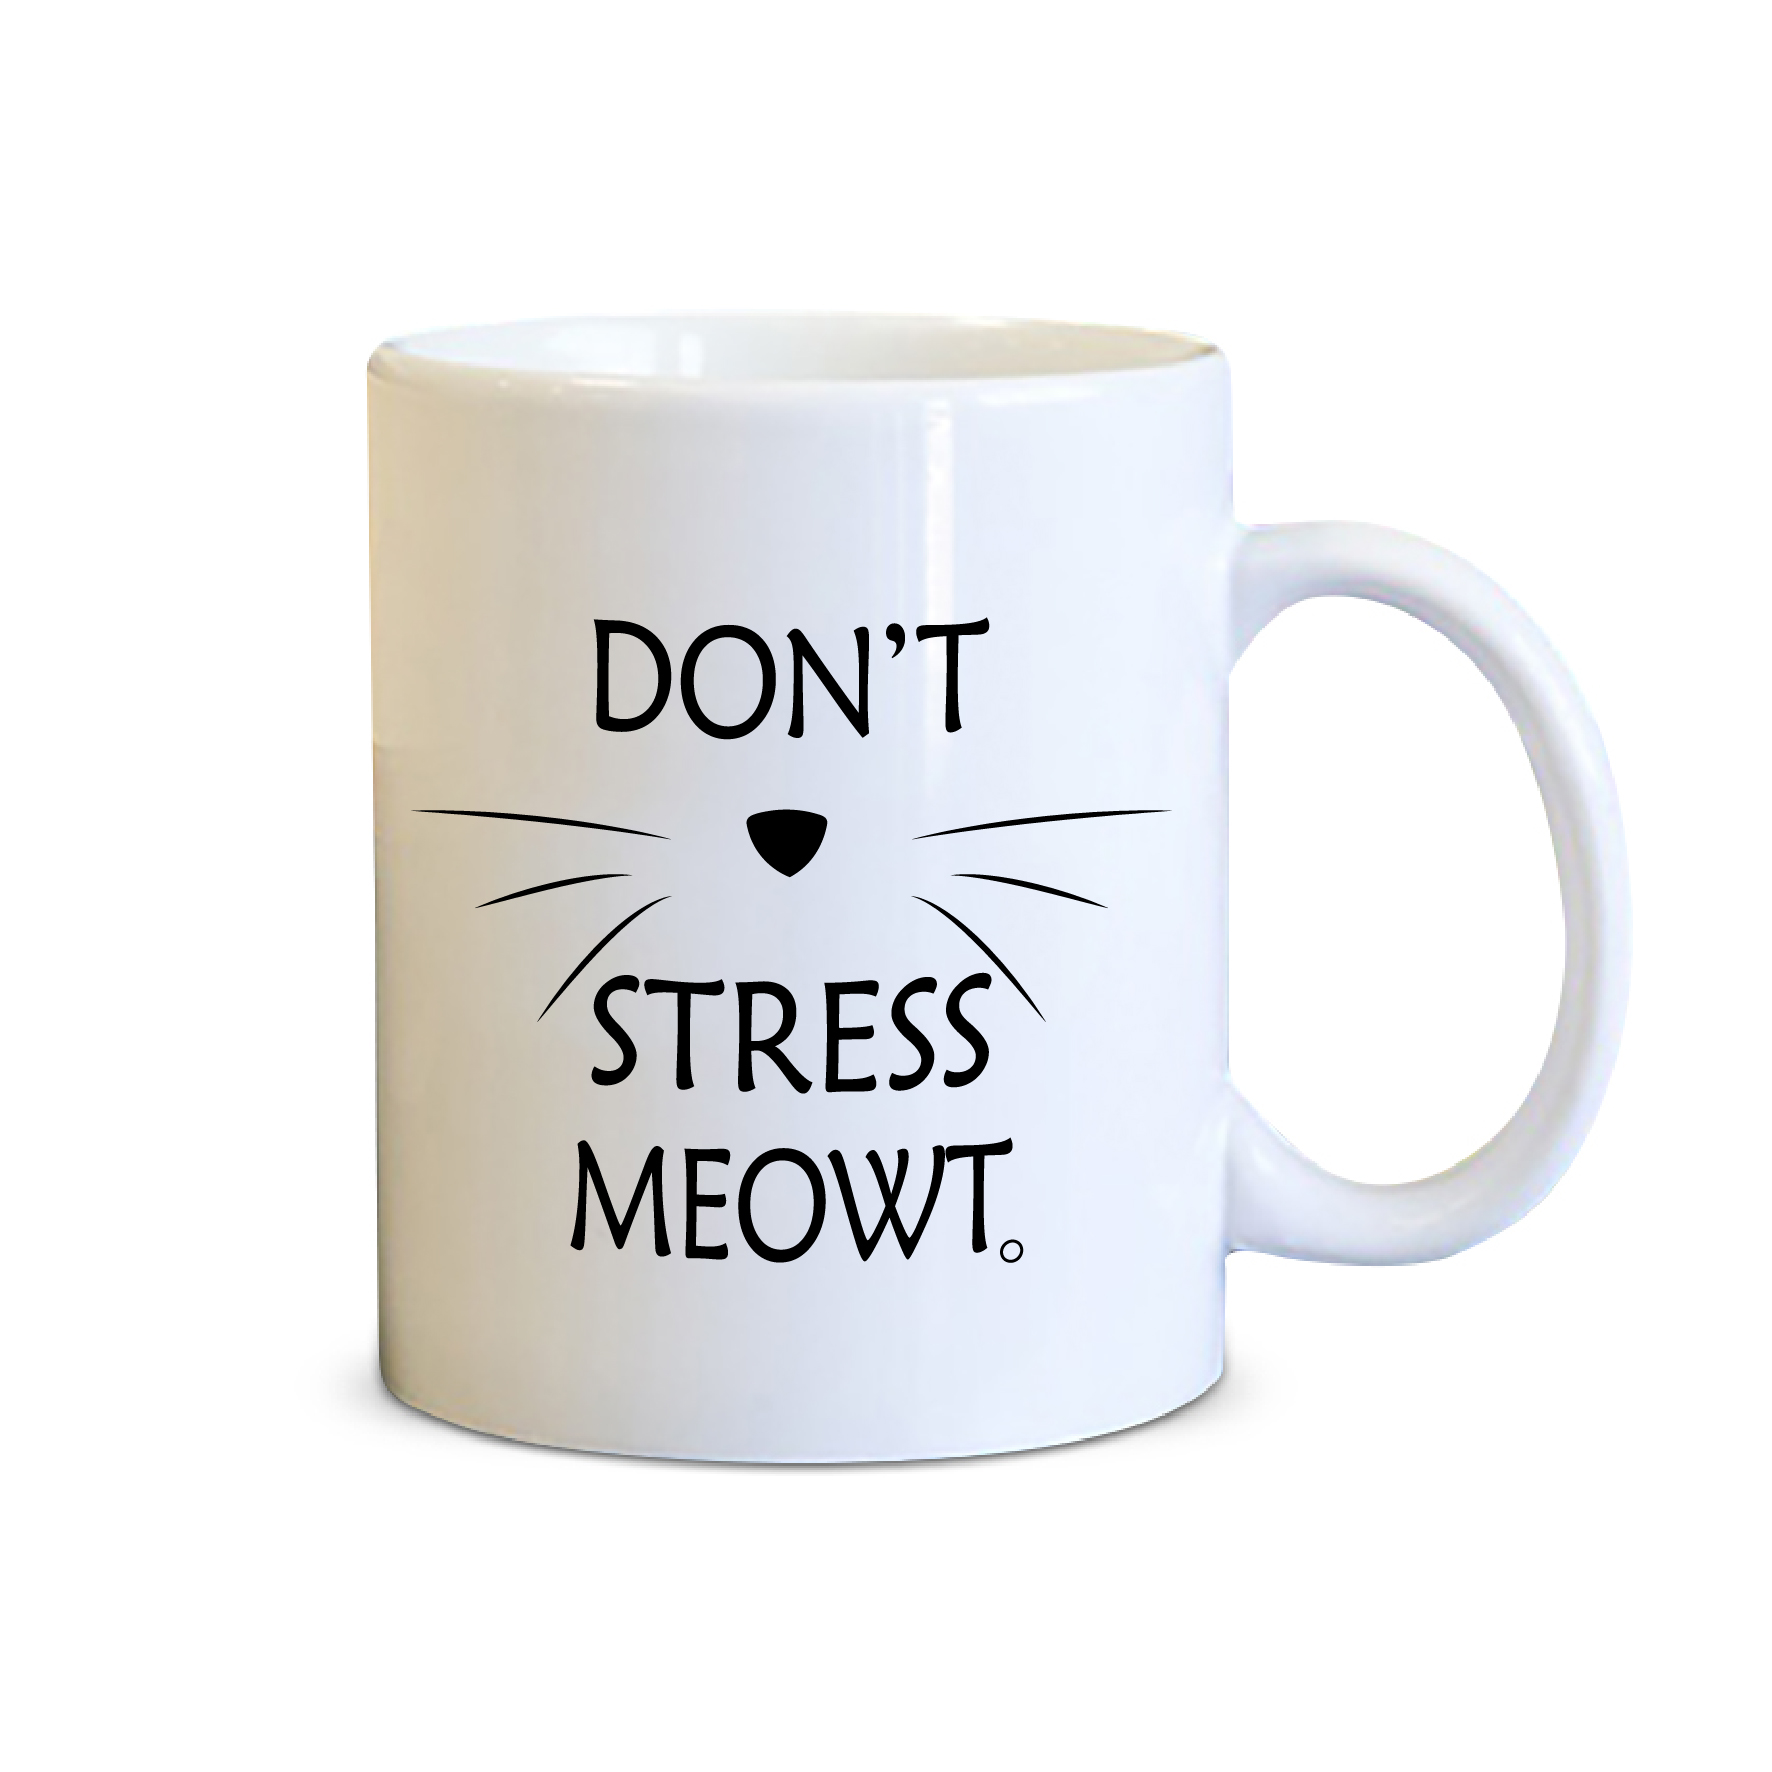 Spoil Your Wall - Coffee Mugs - Funny Cat Quotes